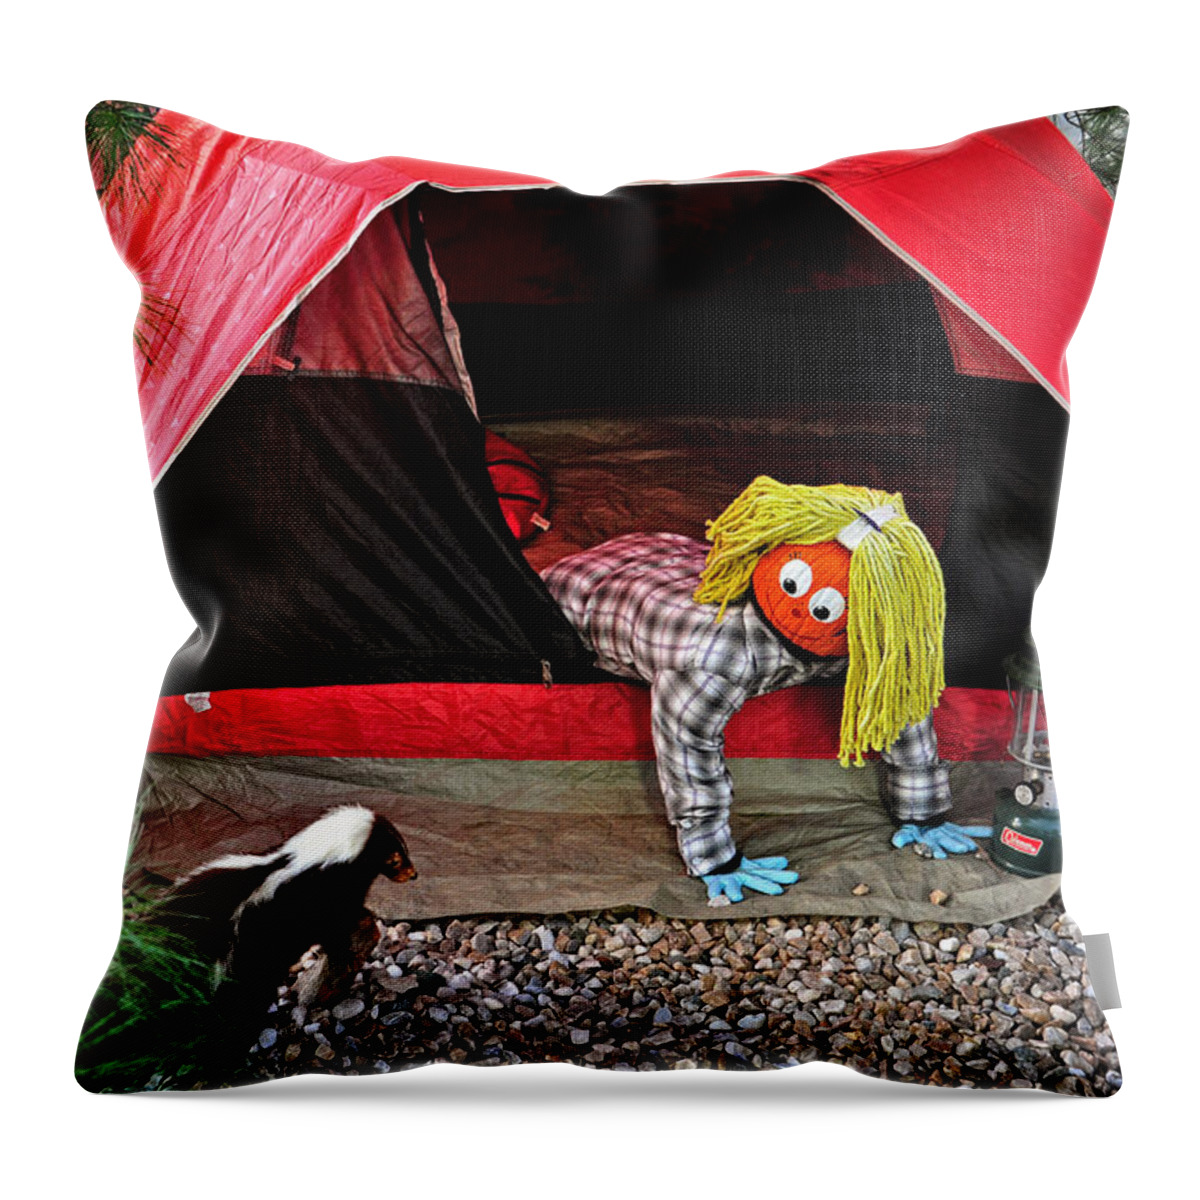 Camp Throw Pillow featuring the photograph Surprise Visitor by Mike Martin